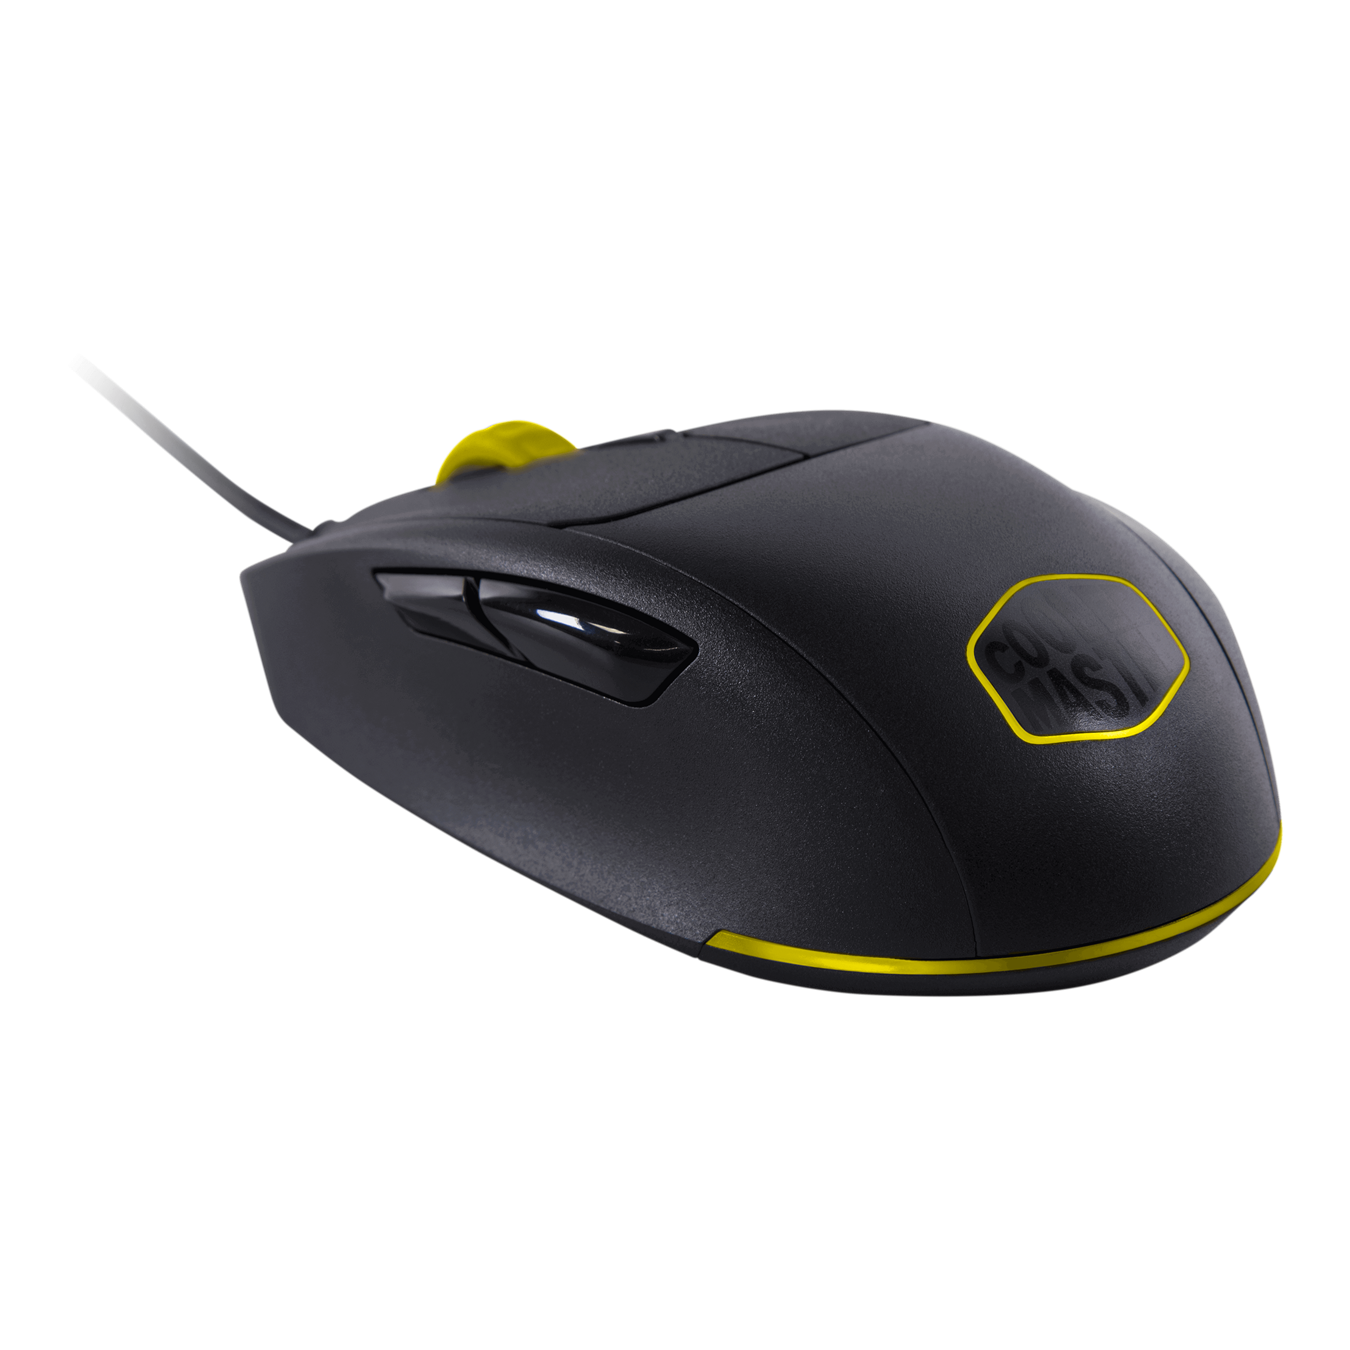 MasterMouse MM520 Gaming Mouse - 7 Buttons that can be programmed for alternate functions or macro’s.